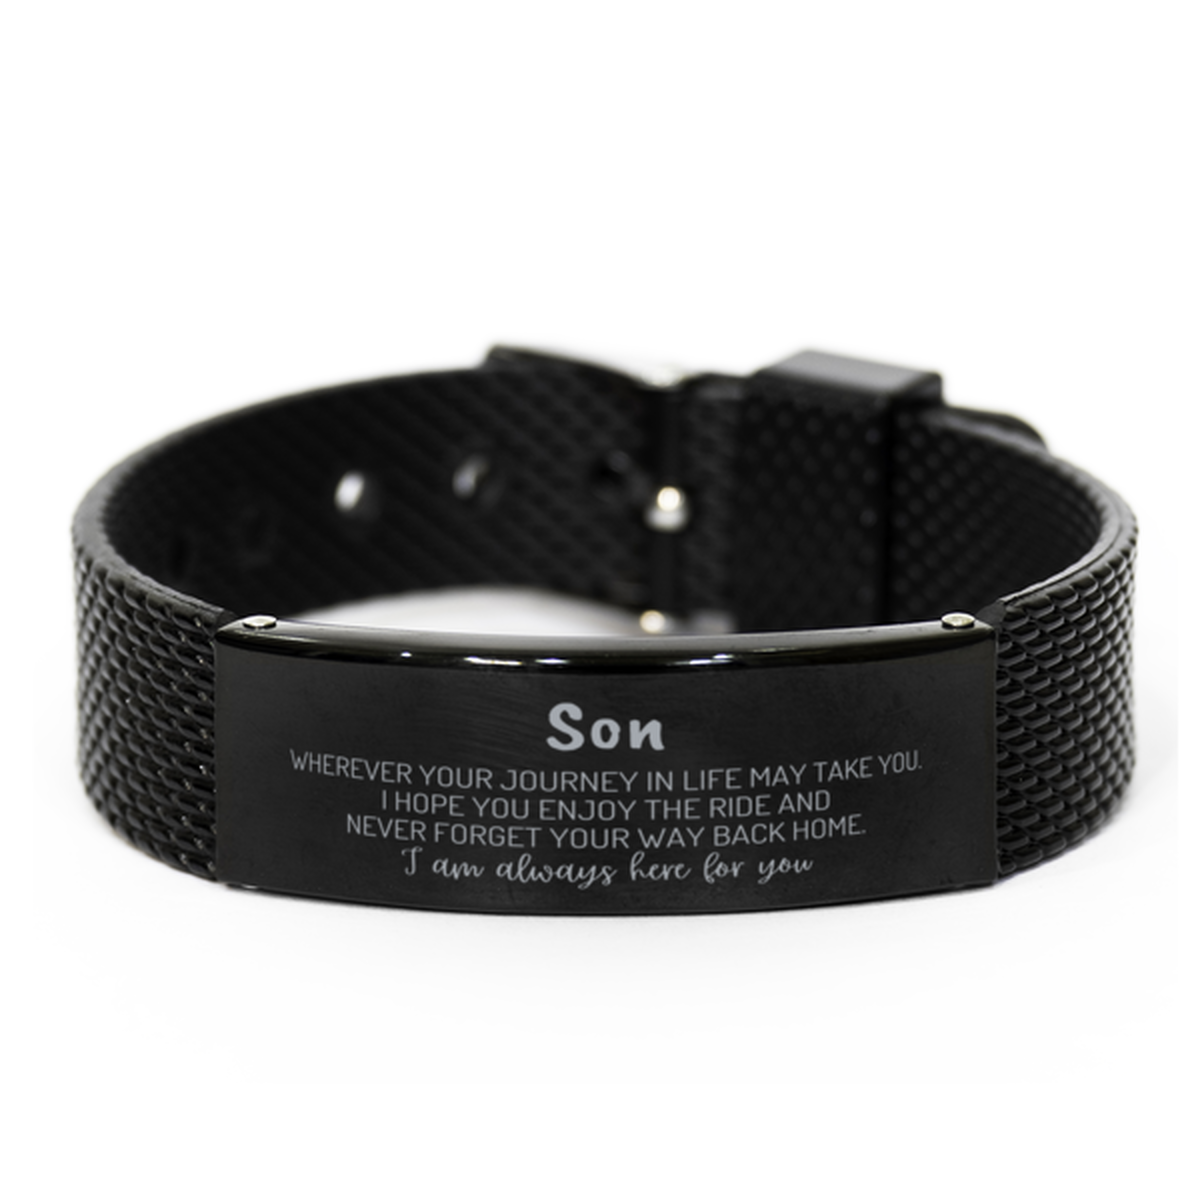 Son wherever your journey in life may take you, I am always here for you Son Black Shark Mesh Bracelet, Awesome Christmas Gifts For Son, Son Birthday Gifts for Men Women Family Loved One